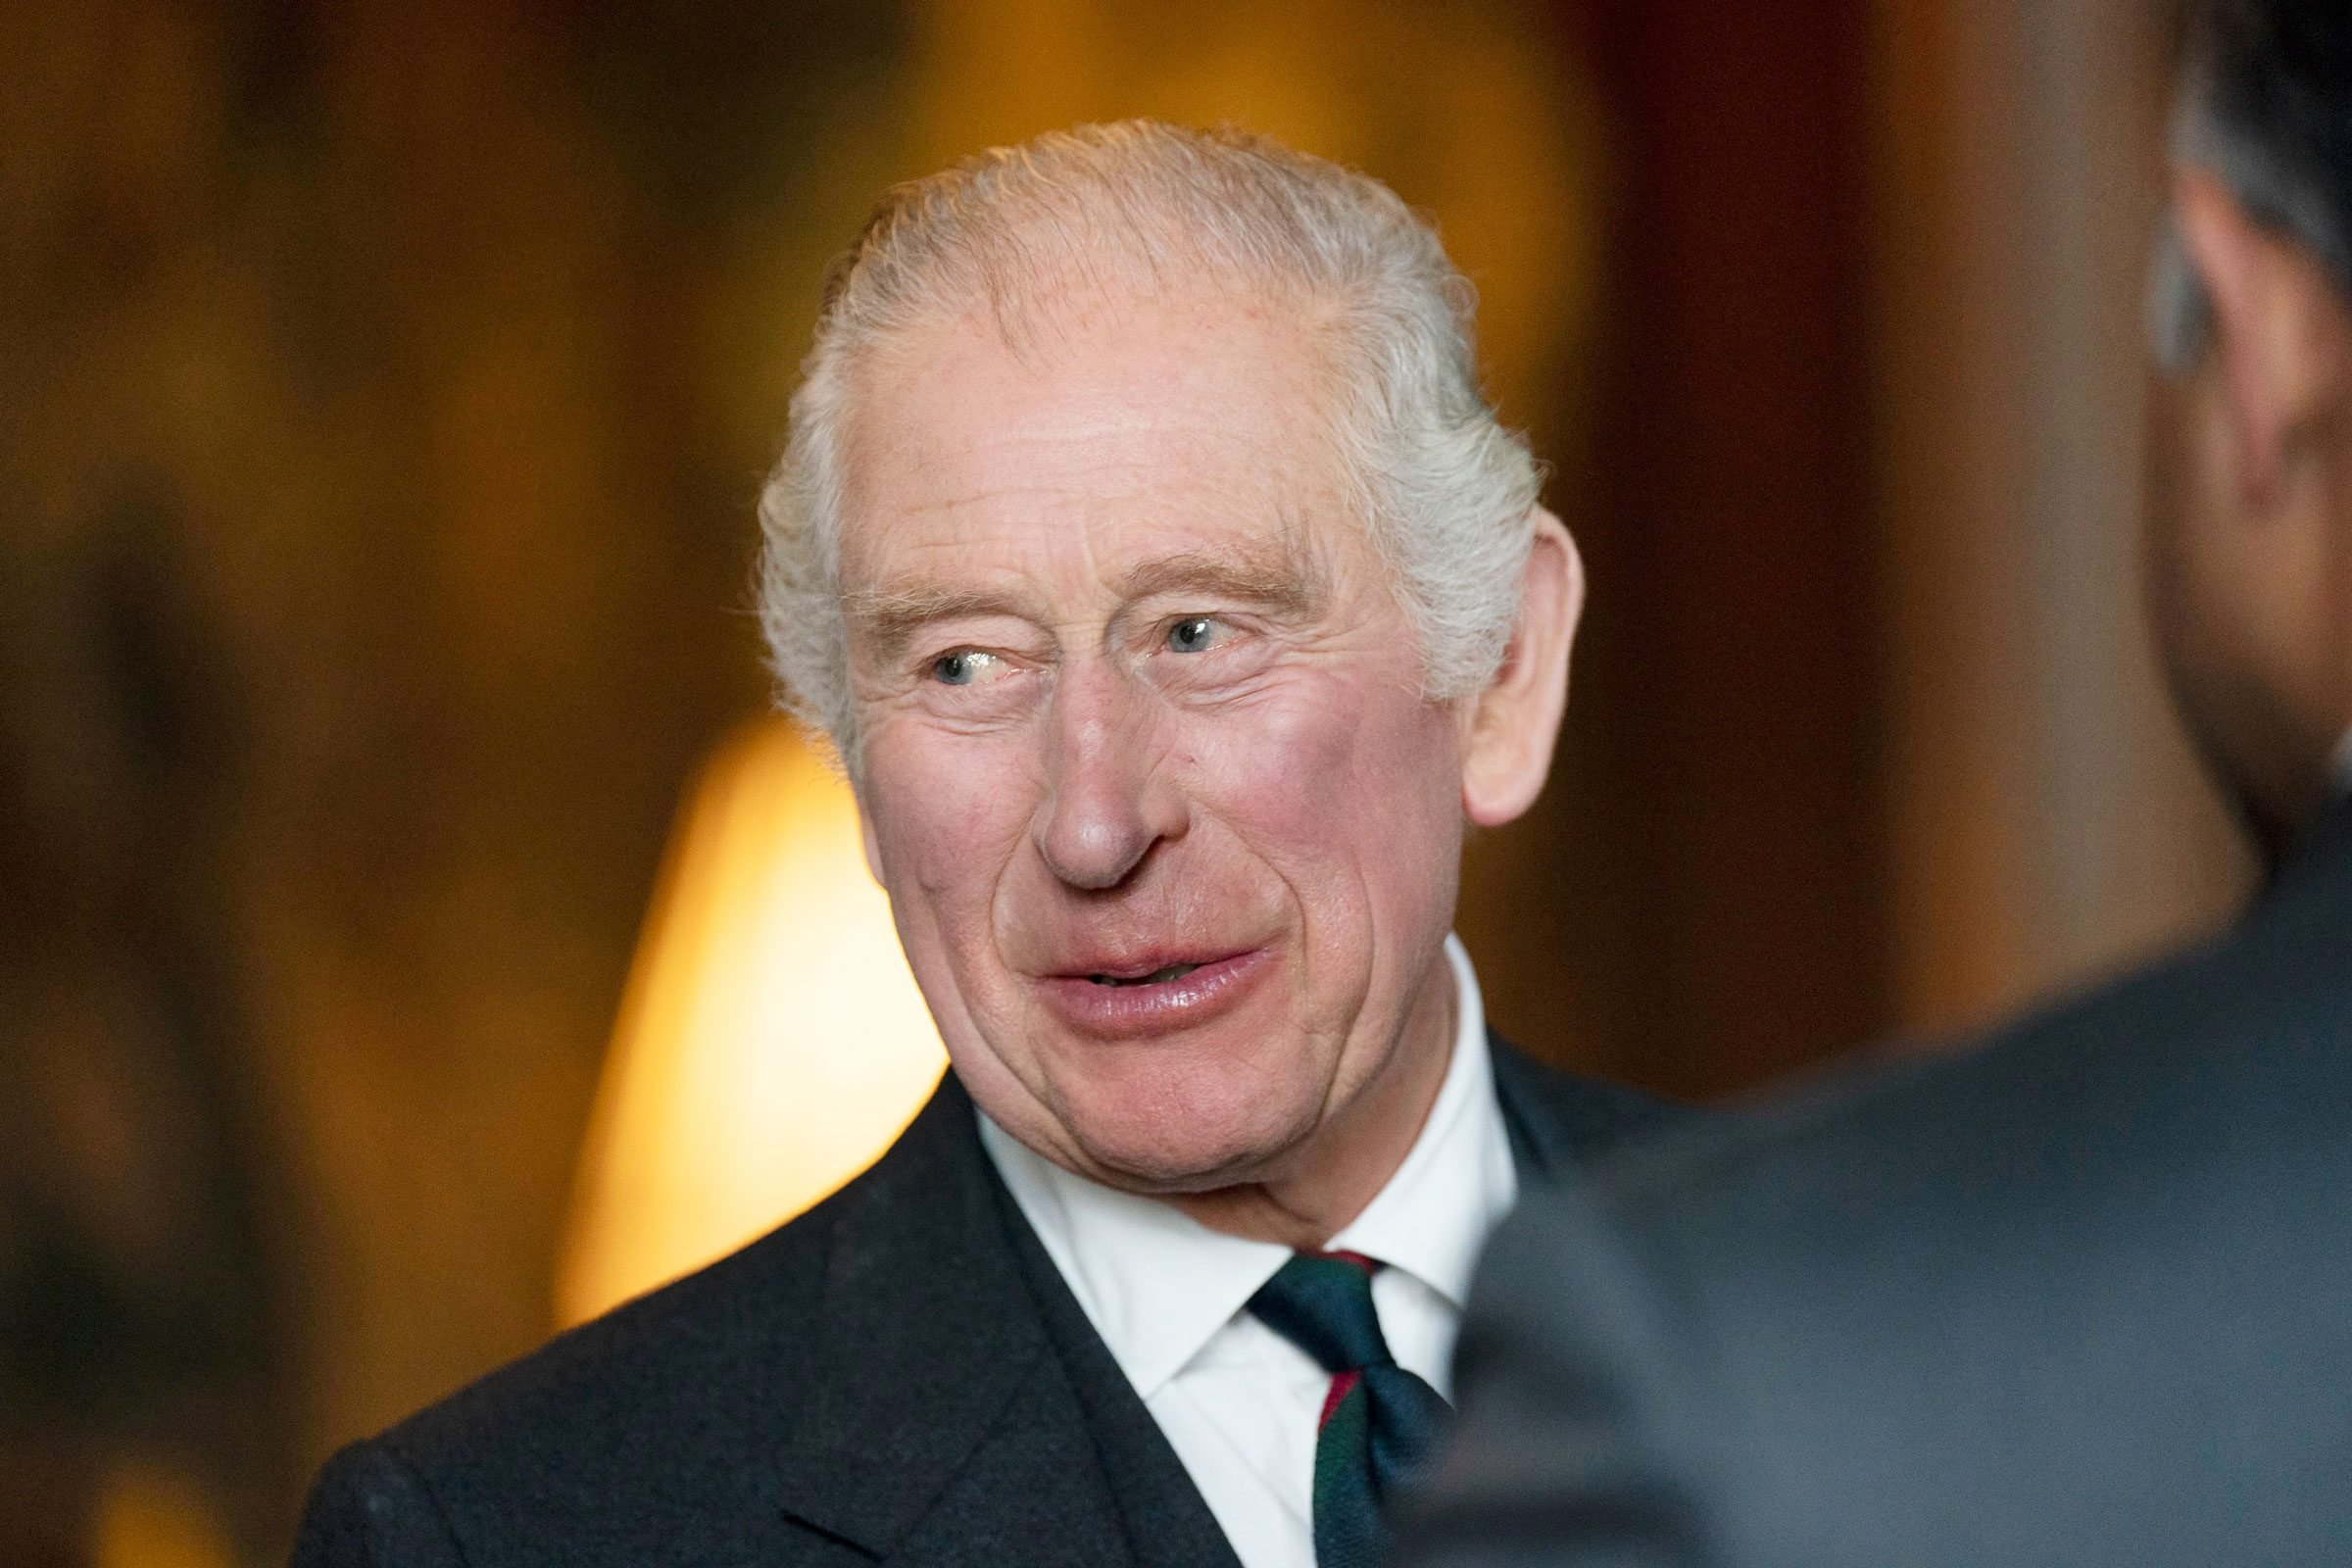 Is King Charles III Healthy? Here's How One Doctor Interprets the Clues